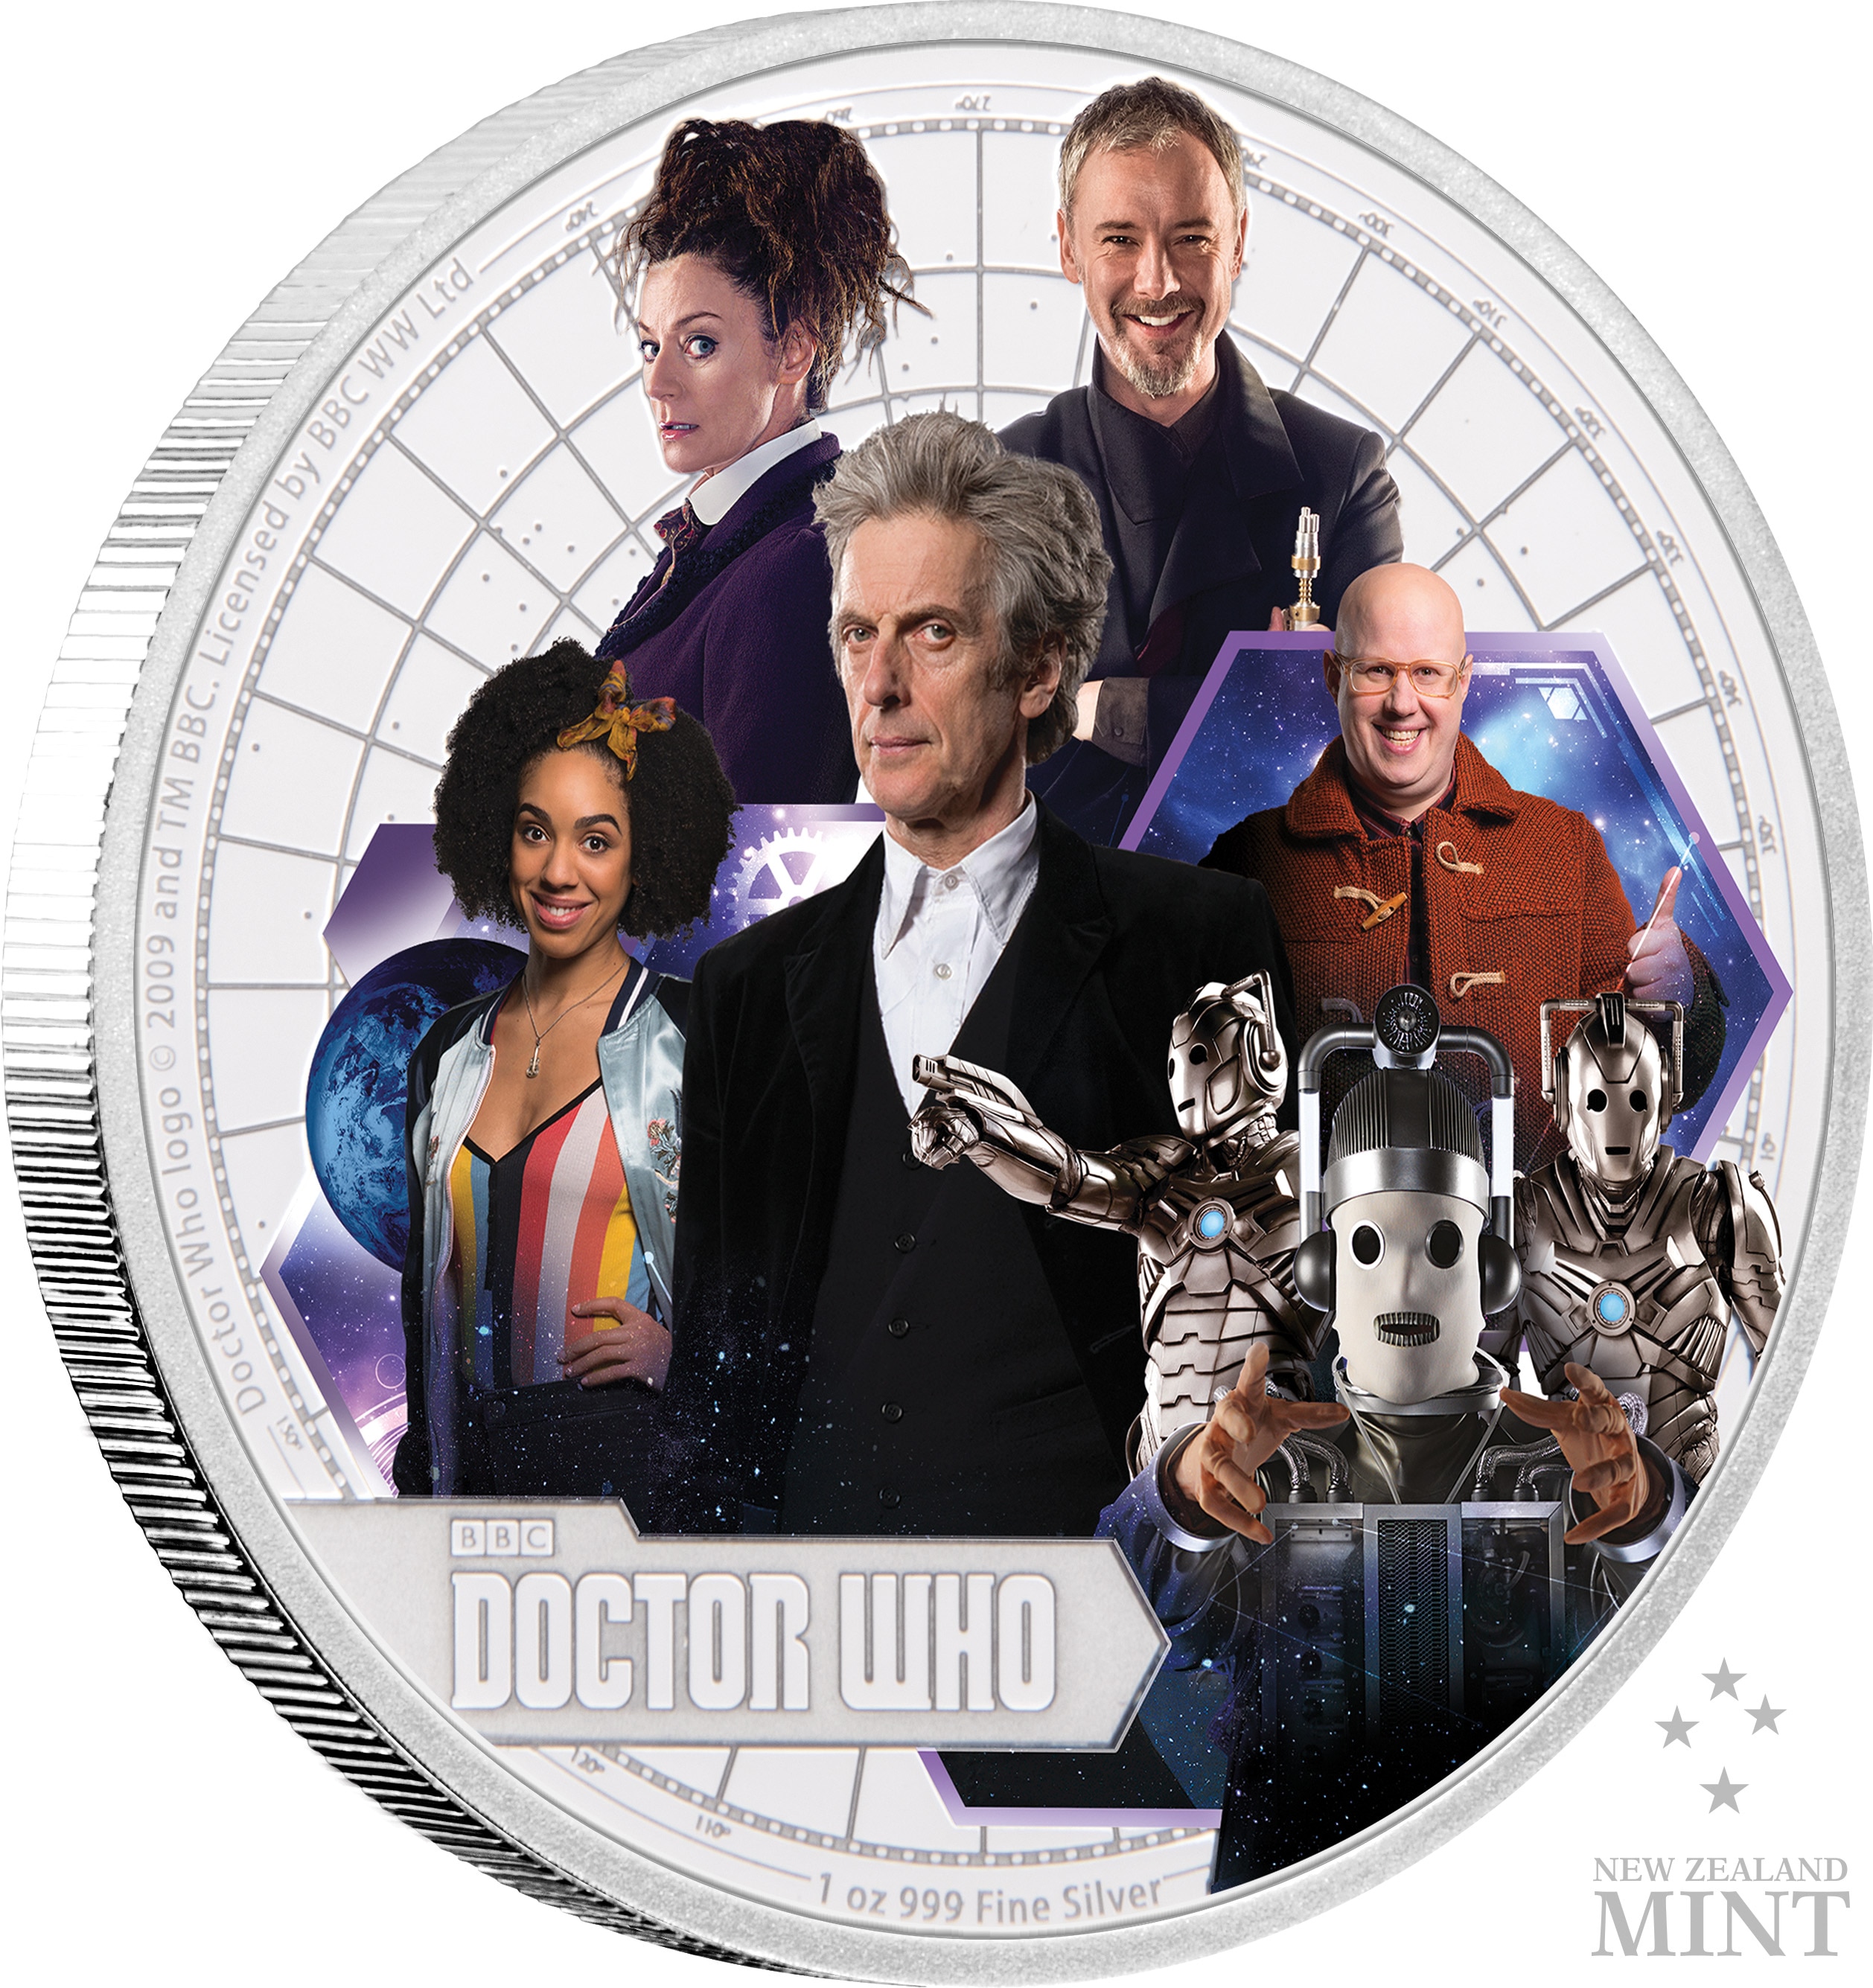 Image of a silver coin with Peter Capaldi, Bill Potts, Missy, The Master, Nardole and the cybermen on it